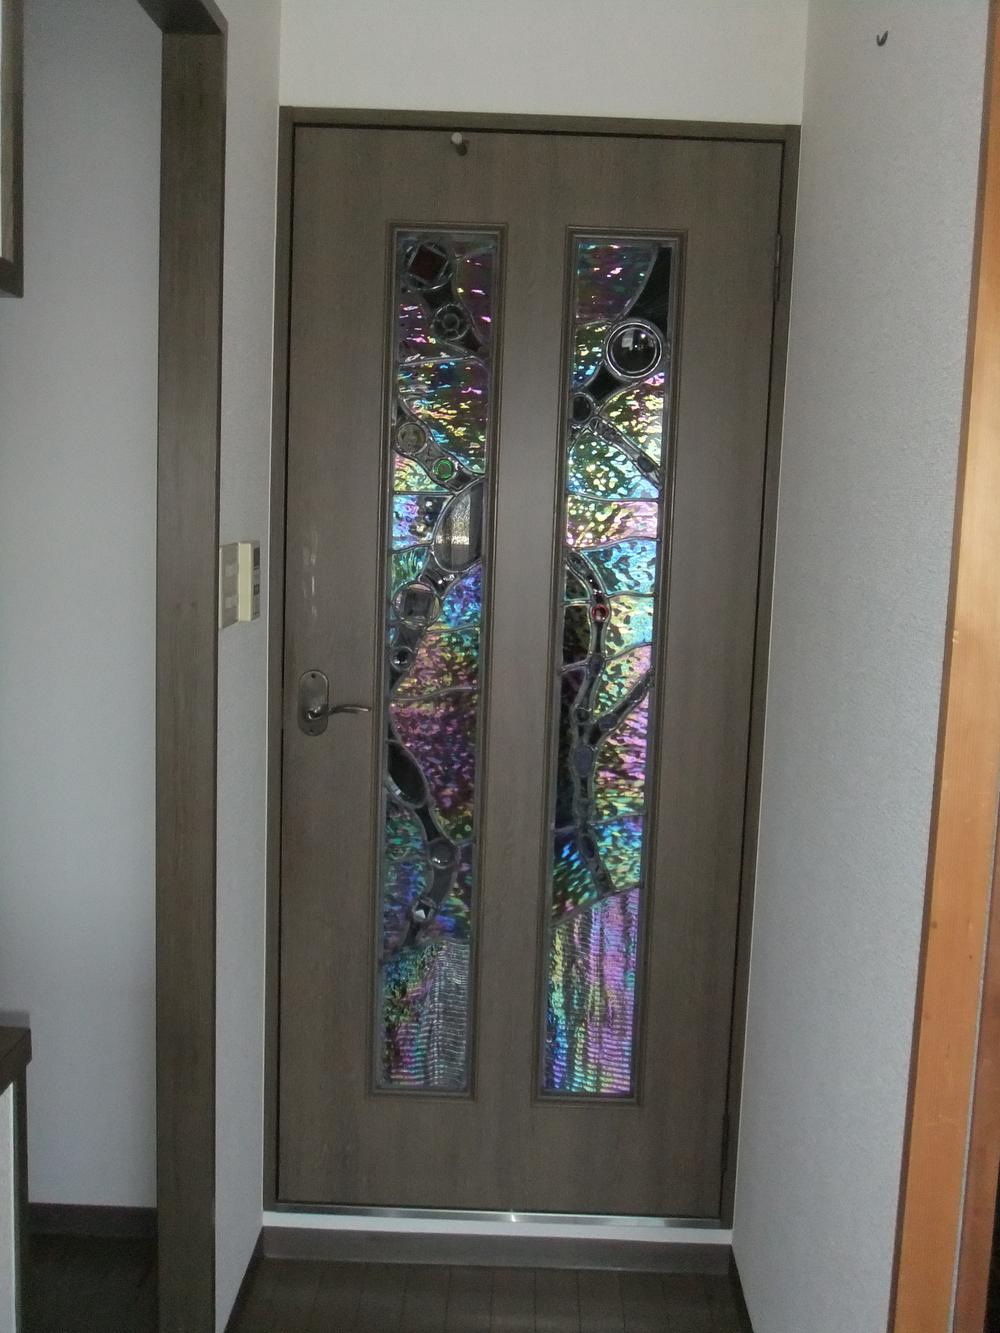 Other introspection. Door stained glass of the living room